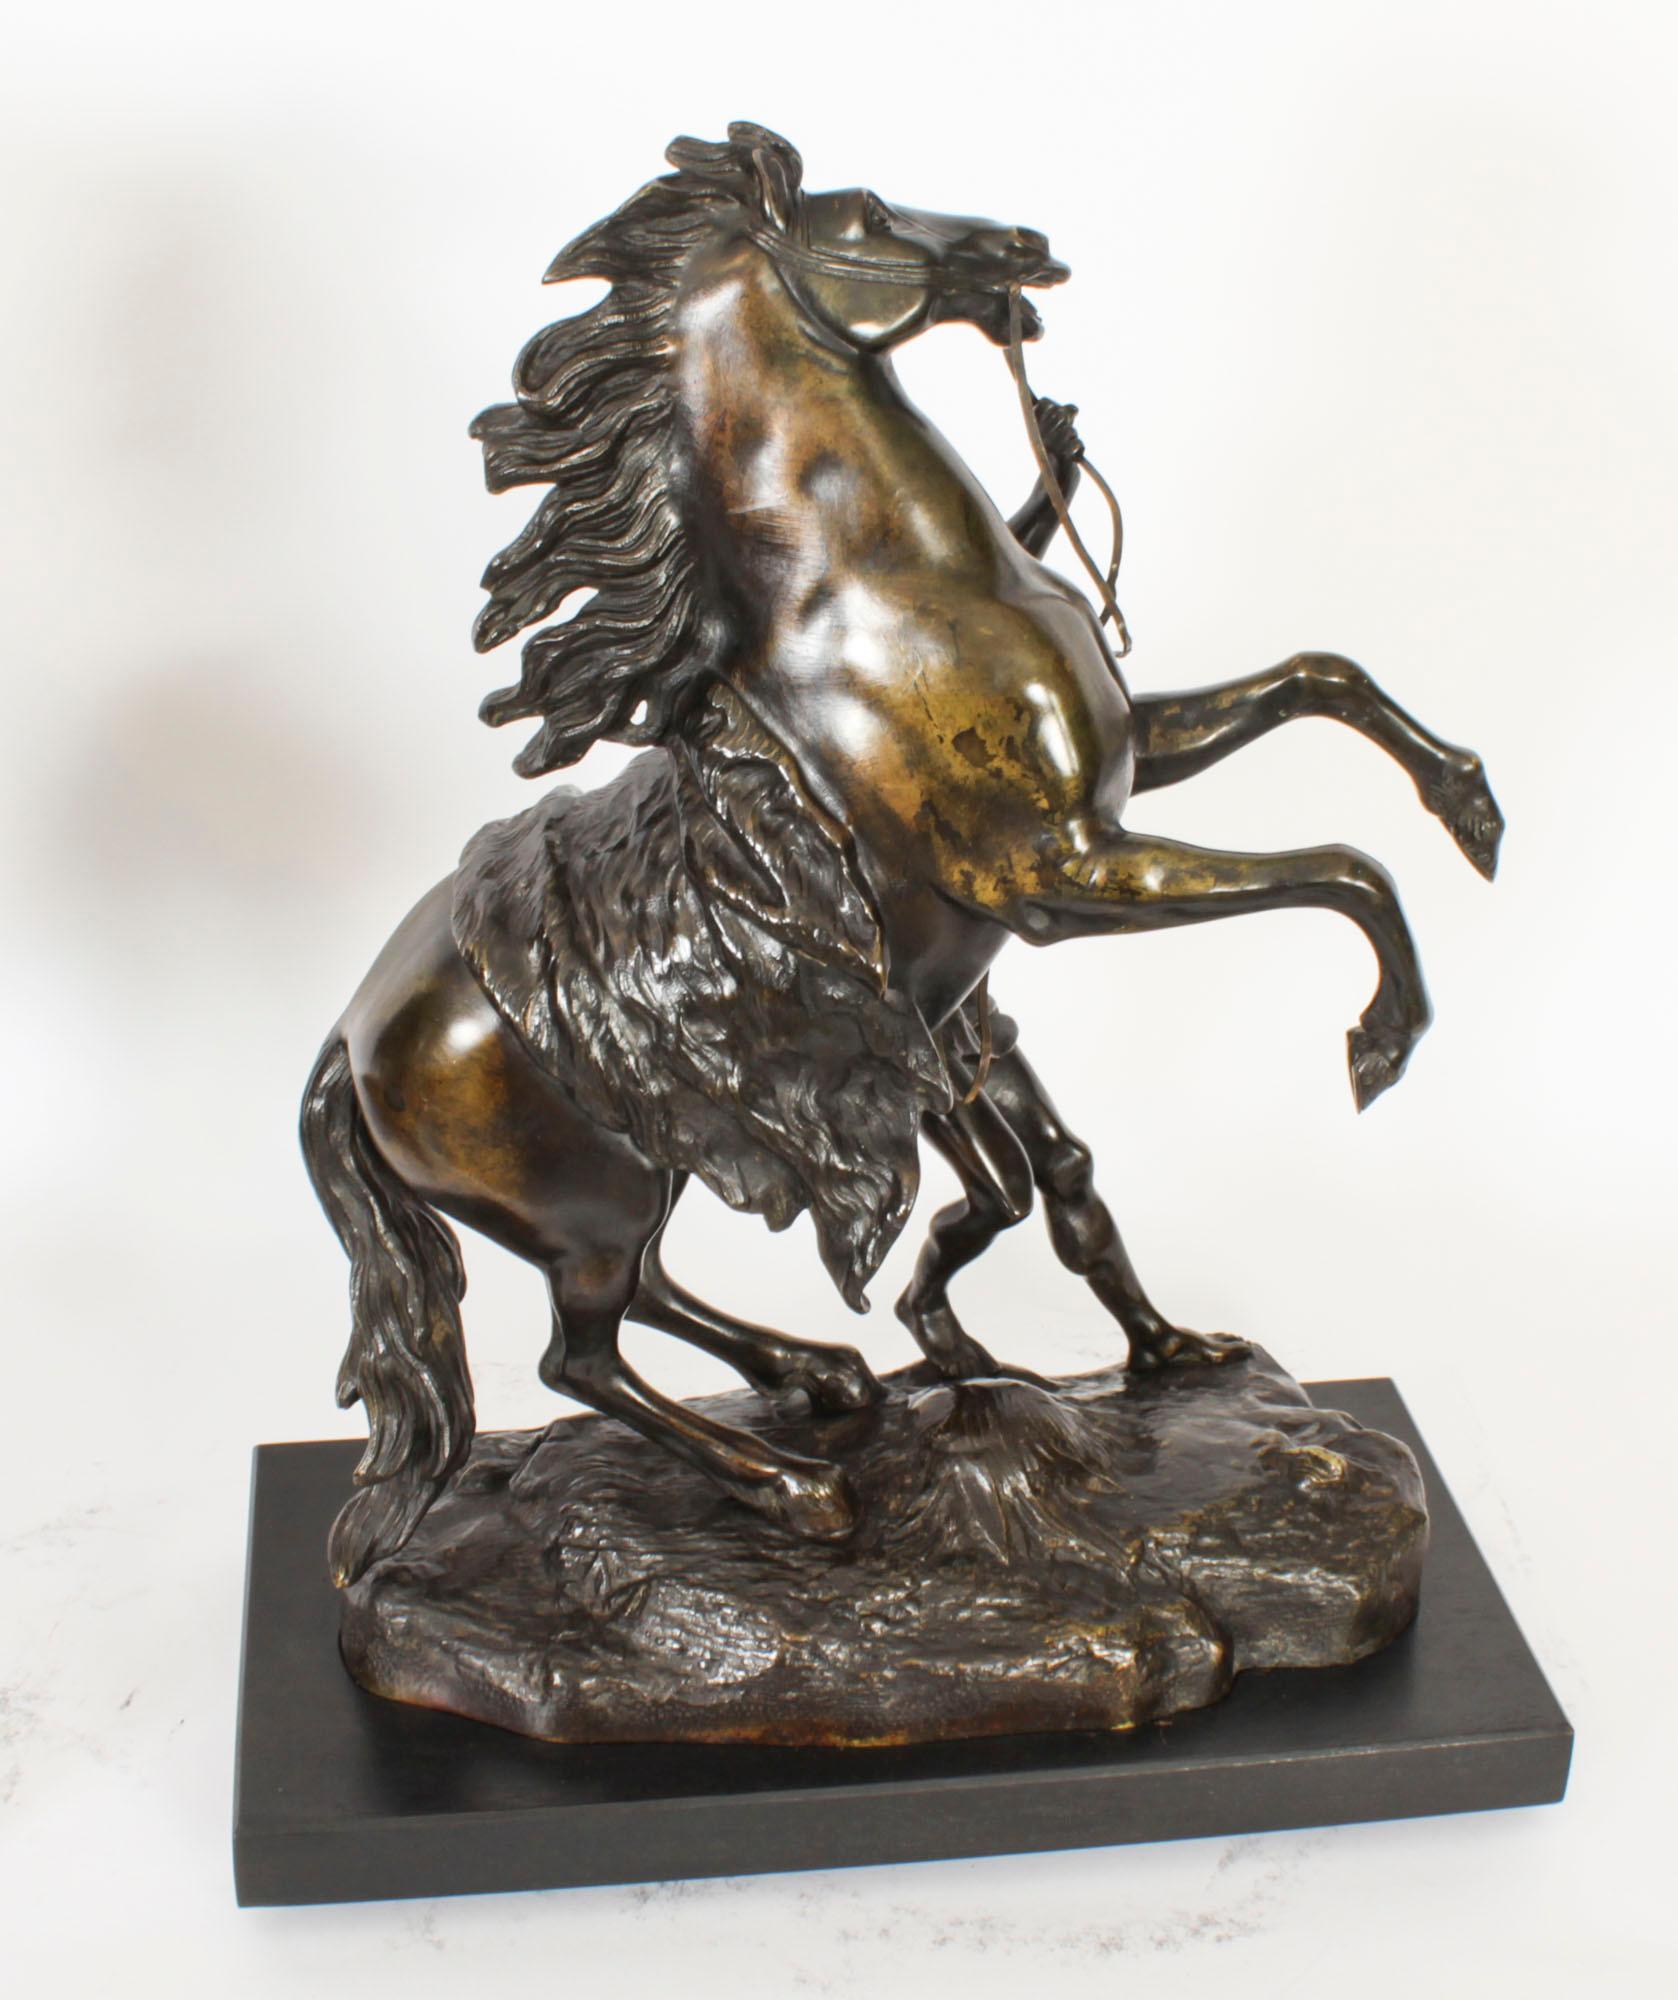 This is a fine antique pair of French Grand Tour patinated-bronze sculptures of the Marly Horses, Circa 1850 in date and signed to one base.
 
The original Marly Horses were commissioned by Louis XV of France, sculpted in Carrara marble, showing two